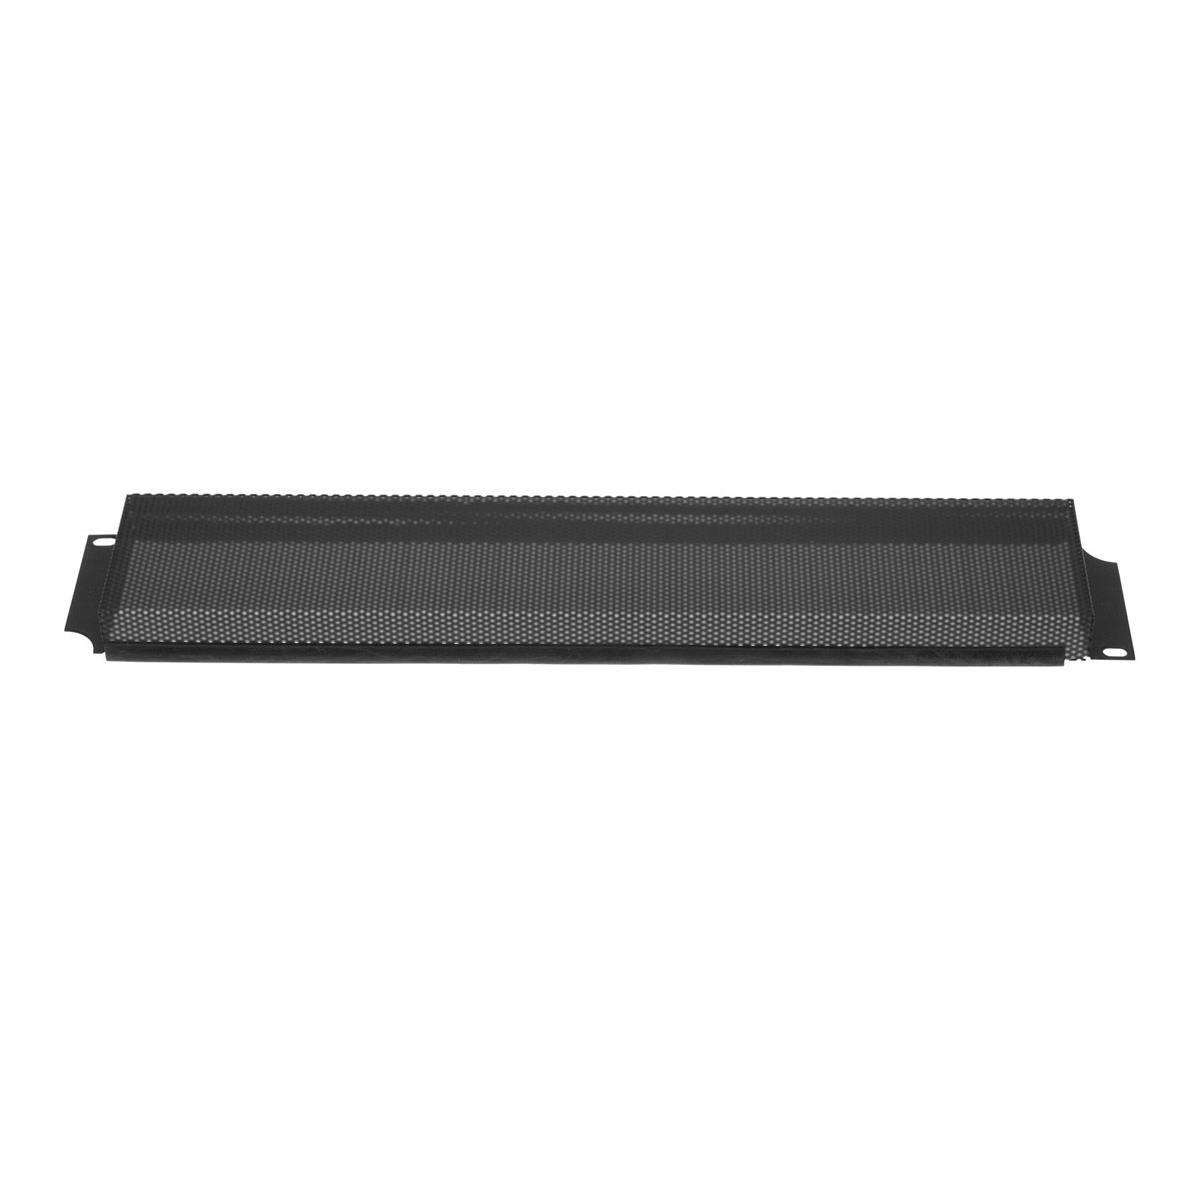 Image of Lowell Manufacturing SSC-1V 1U Rack Panel Security Cover